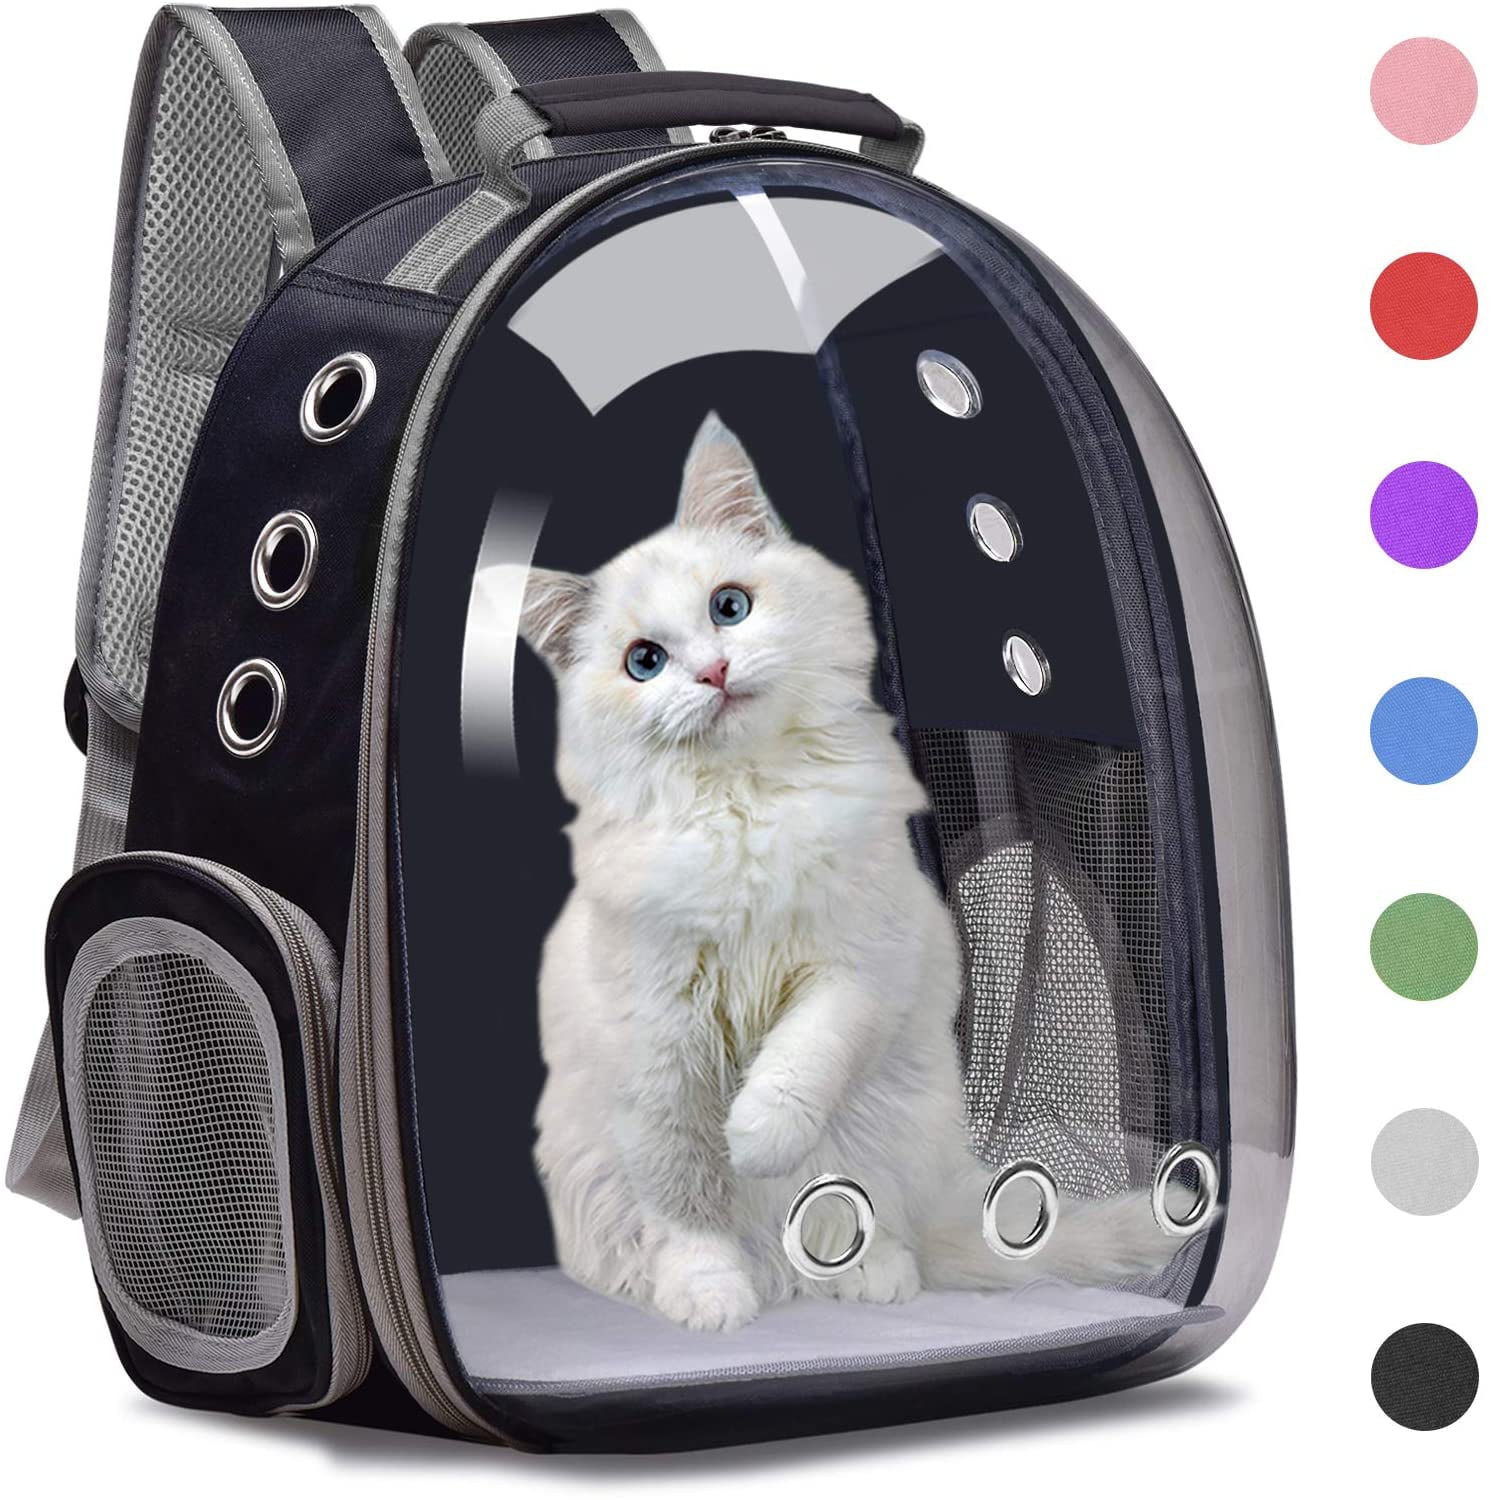 Henkelion Cat Backpack Carrier Bubble Bag， Small Dog Backpack Carrier for Small Dogs， Space Capsule Pet Carrier Dog Hiking Backpack Airline Approved Travel Carrier - Black Grey Pink Blue Purple Green